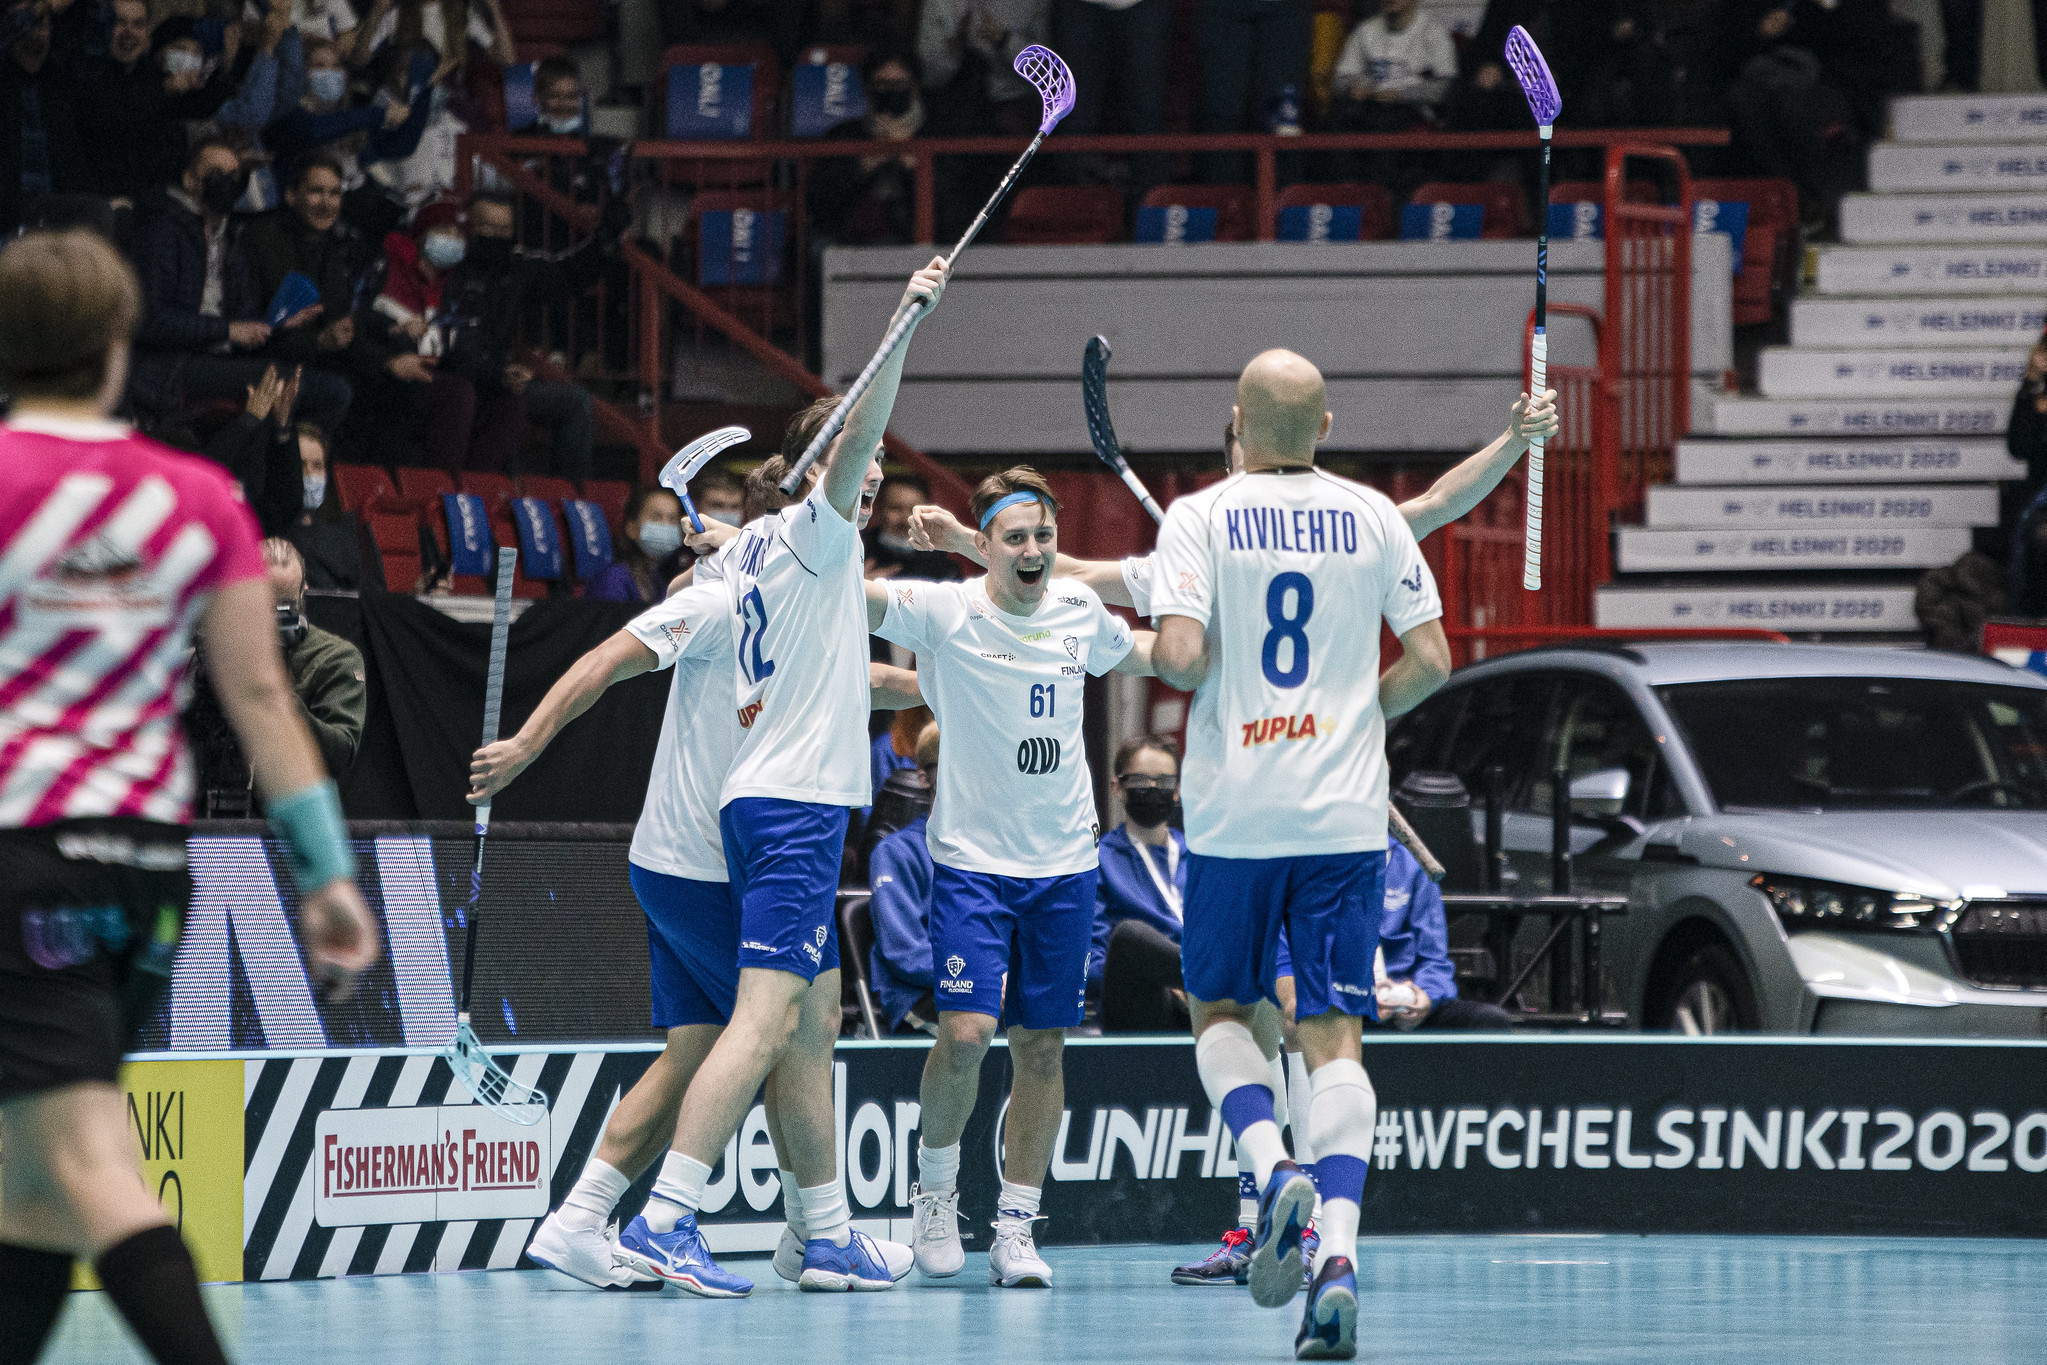 Last year's runners-up Finland were among the European qualifiers for this year's Men's World Floorball Championship ©IFF